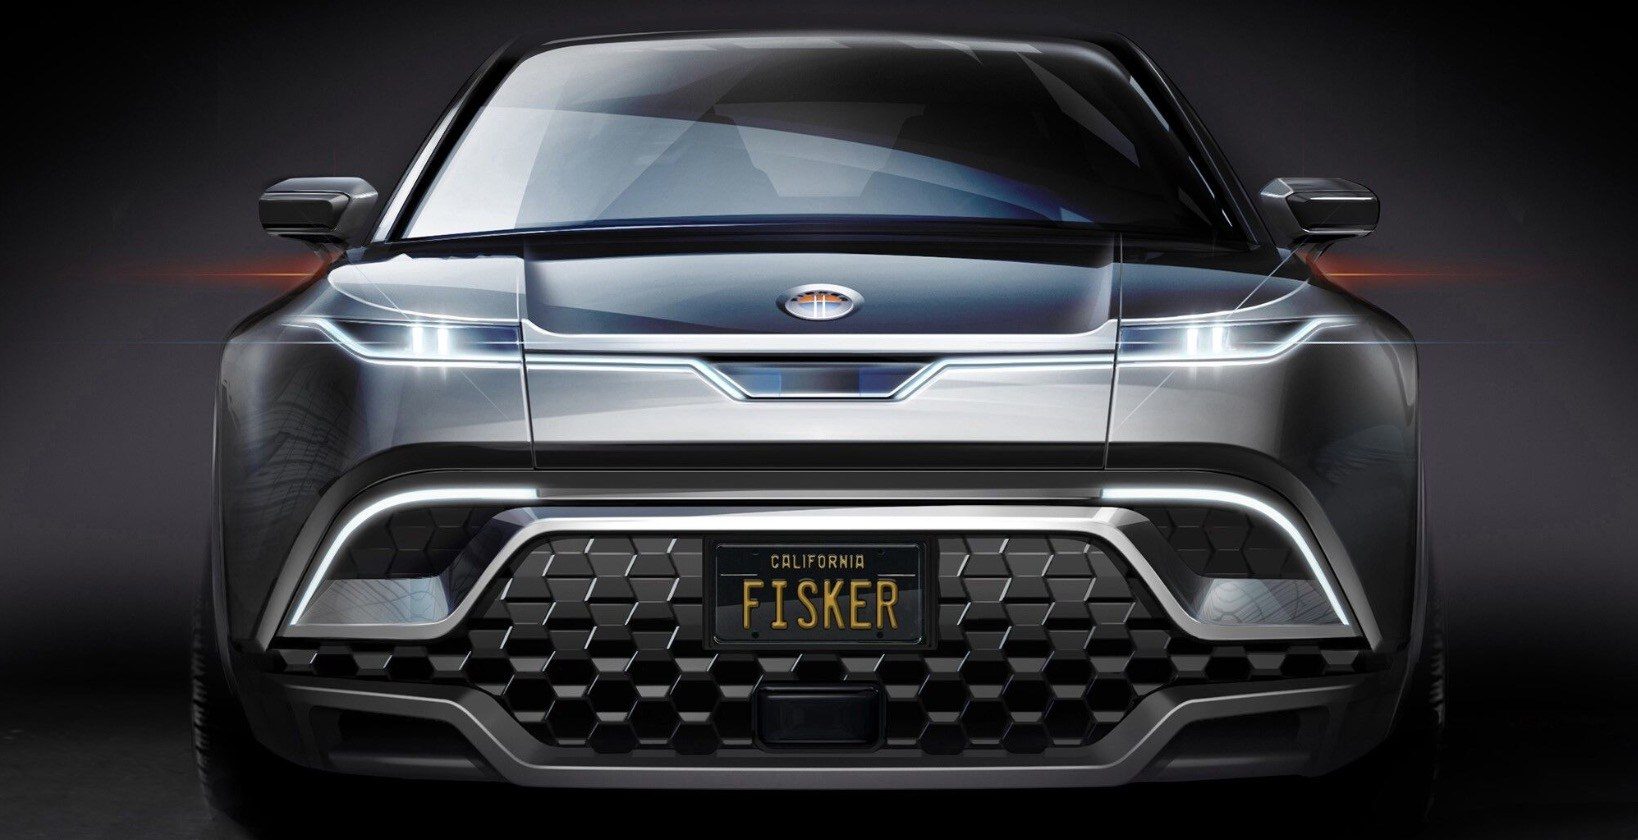 Fisker announces new sub-$40,000 electric SUV with 300 miles of range, should you get excited?